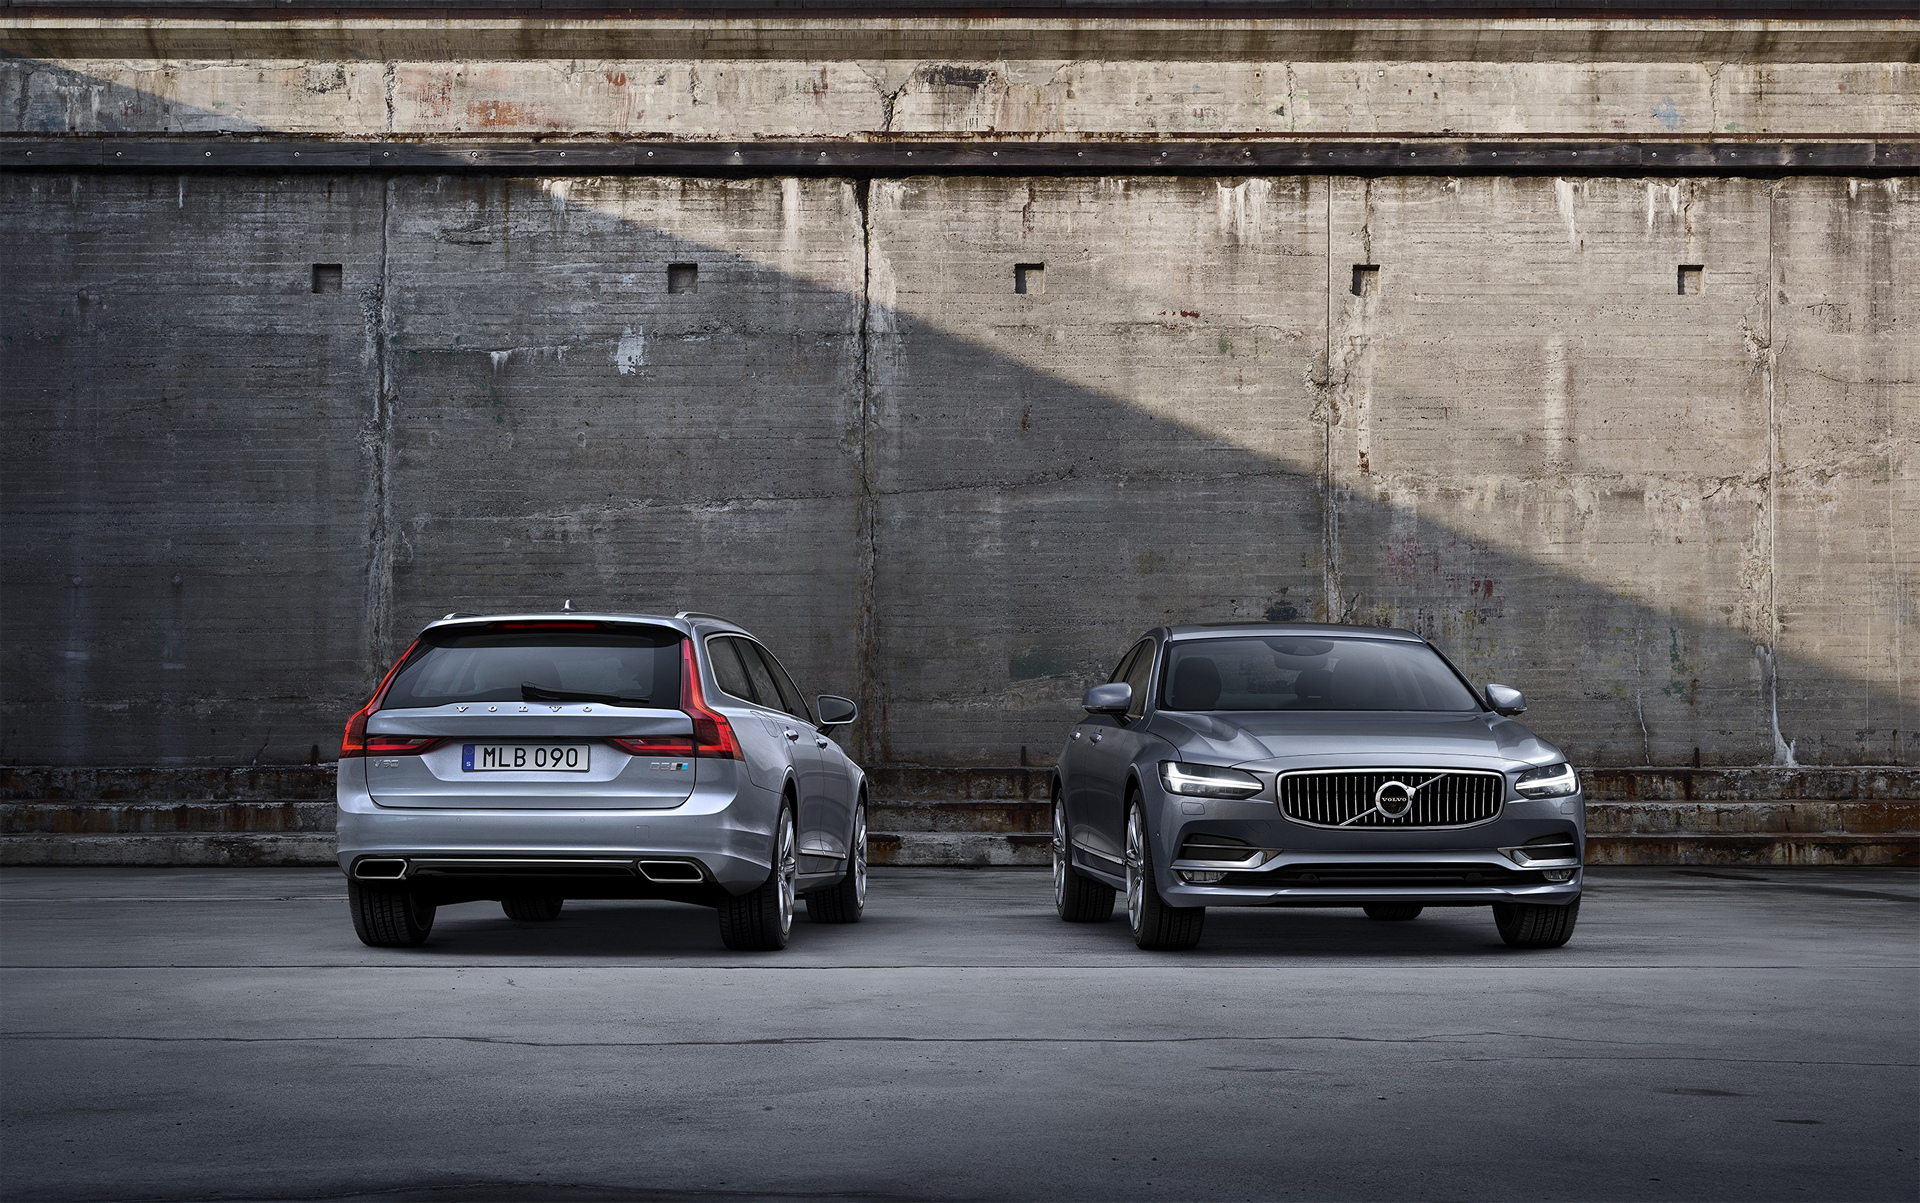 New Polestar performance package now available for the Volvo S90 and V90 © Zhejiang Geely Holding Group Co., Ltd